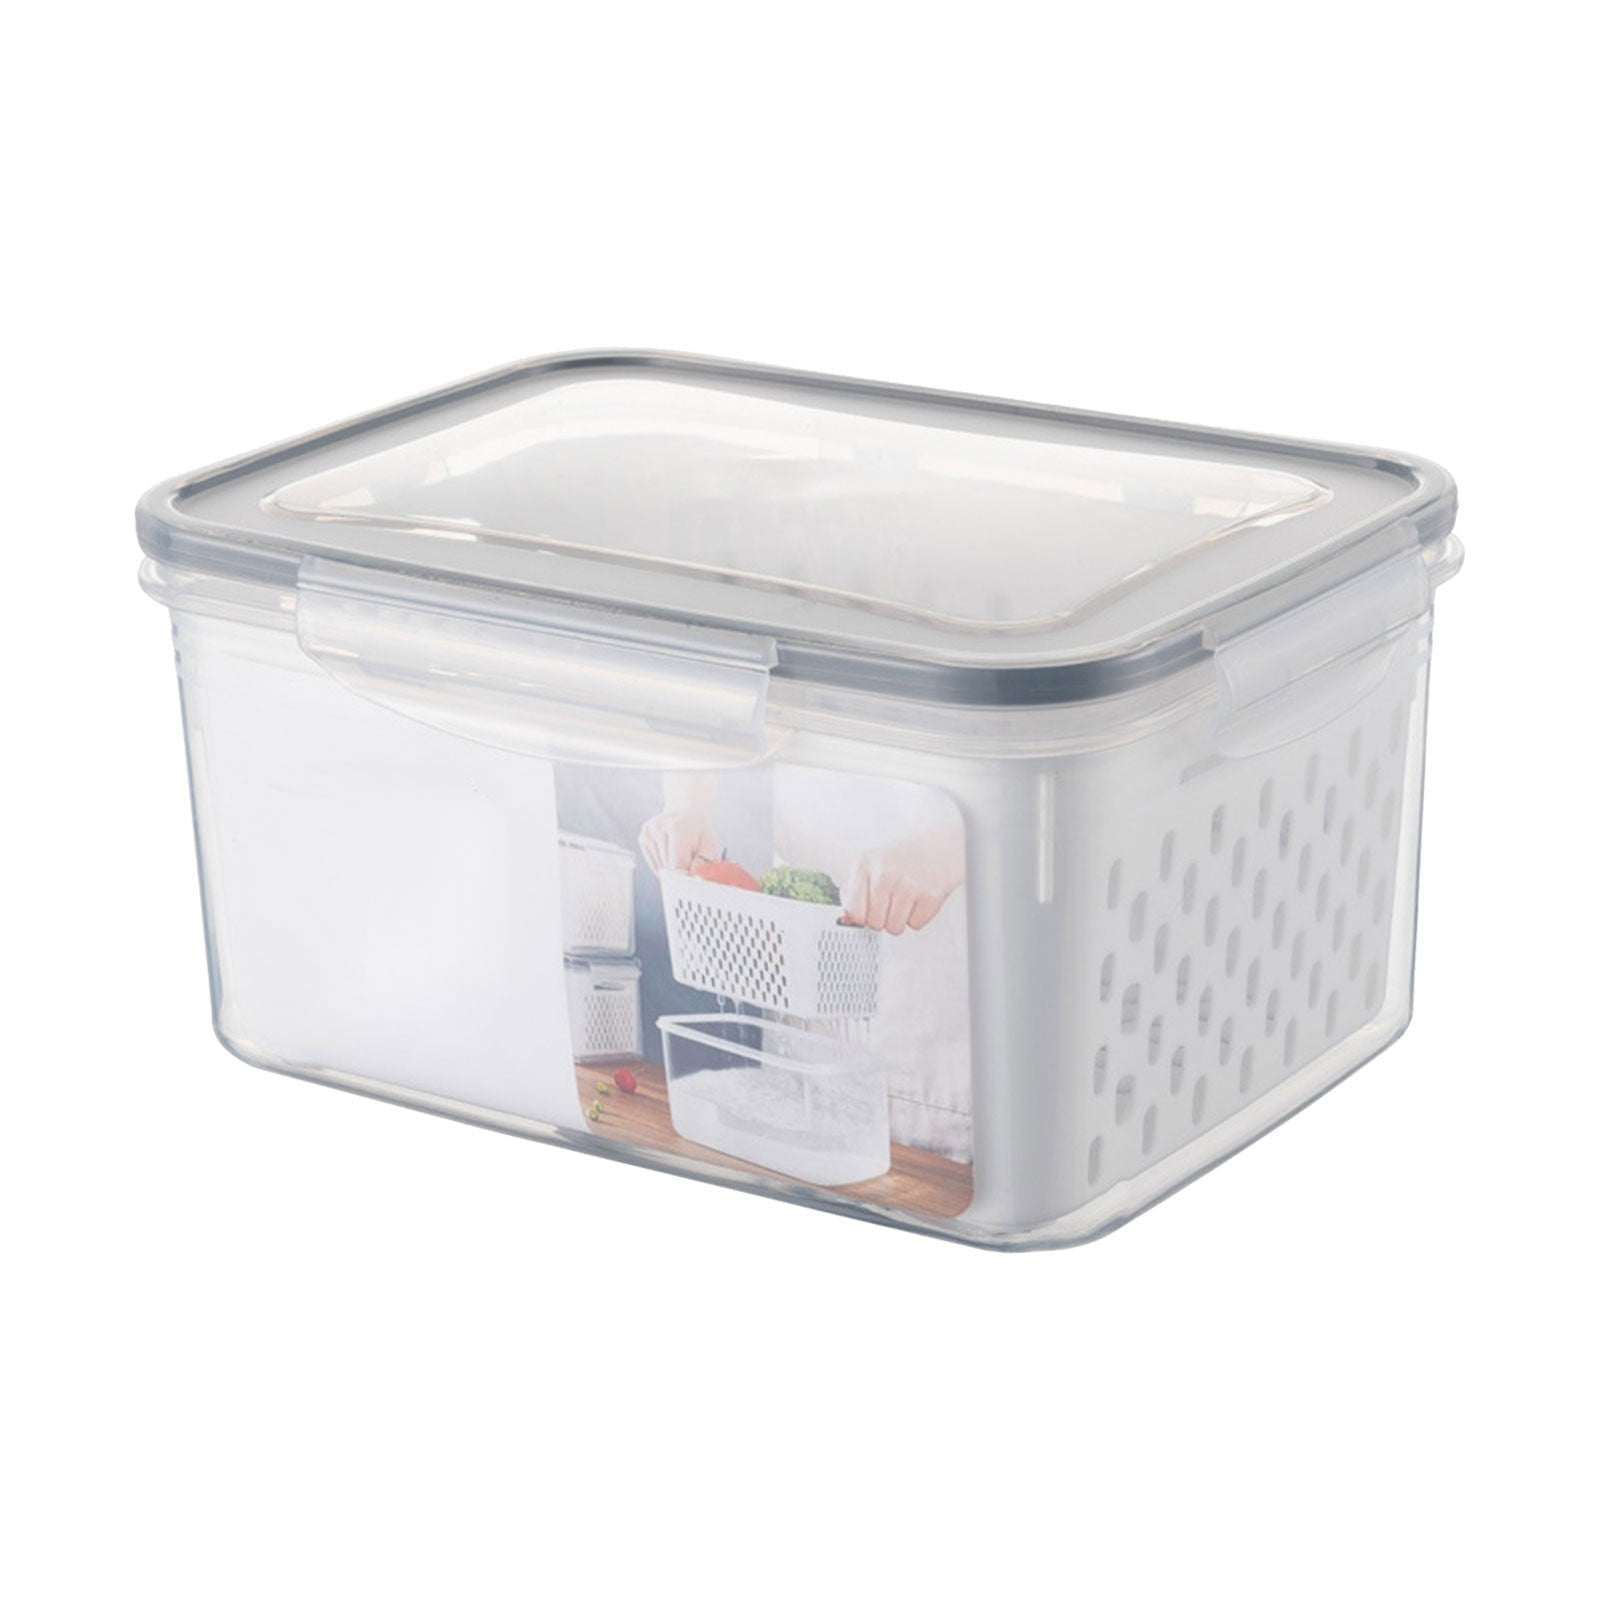 Yubatuo Fridge Food Storage Container with Lids, Plastic Fresh Produce ...